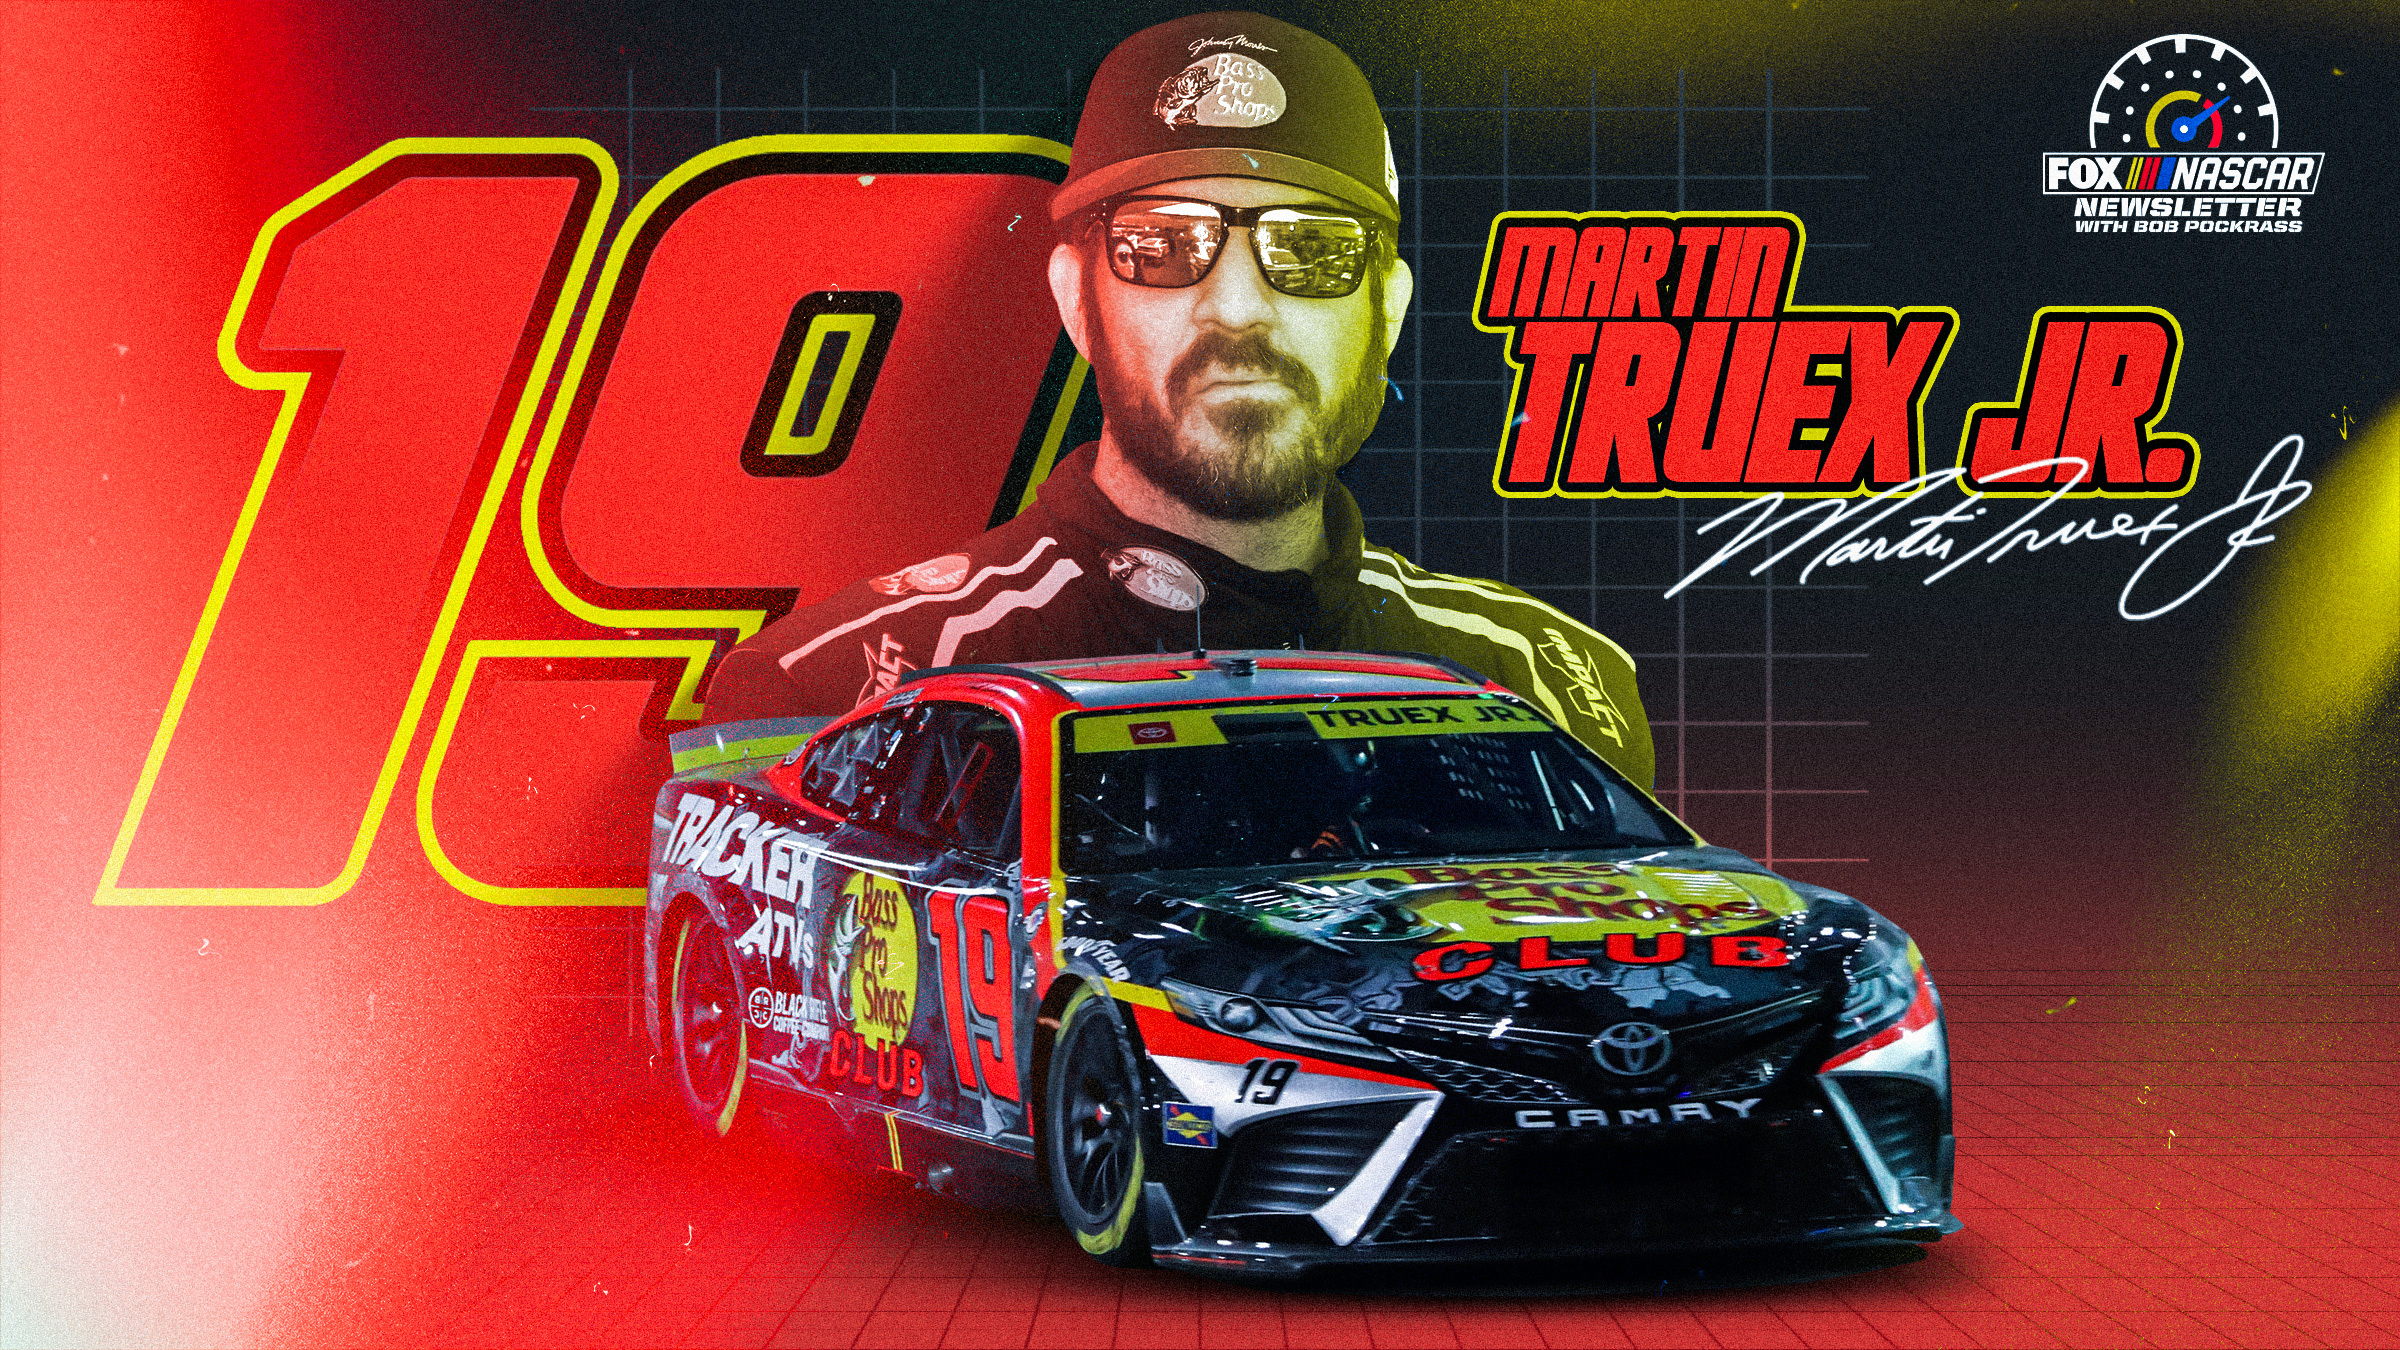 Martin Truex Jr. relishes second chance with NASCAR's playoff system